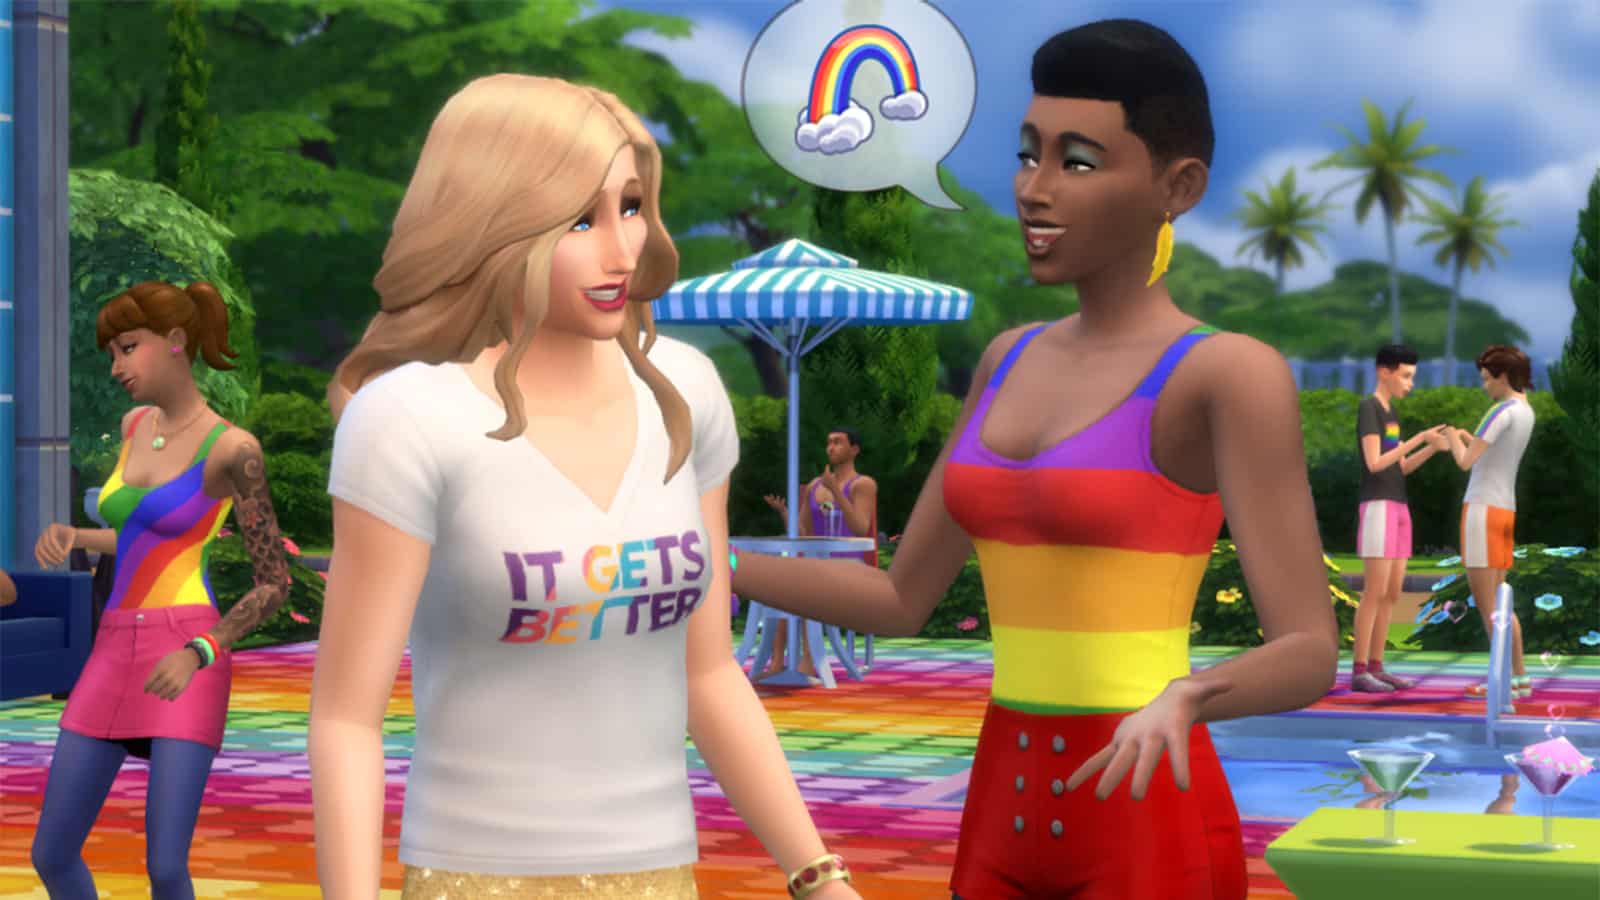 Two LGBTQ characters in The Sims 4